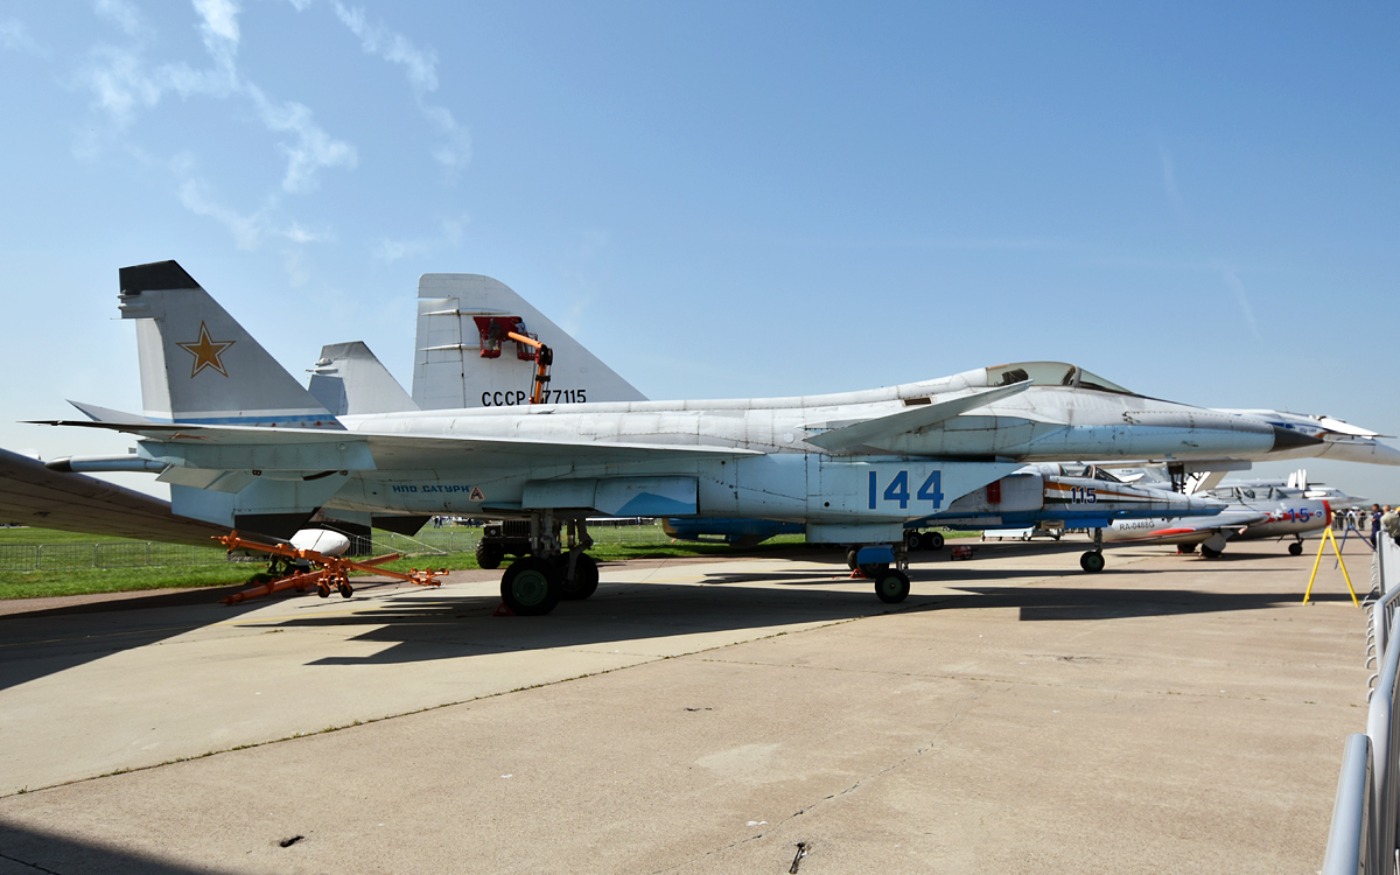 MiG 1.44 that may have inspired J-20